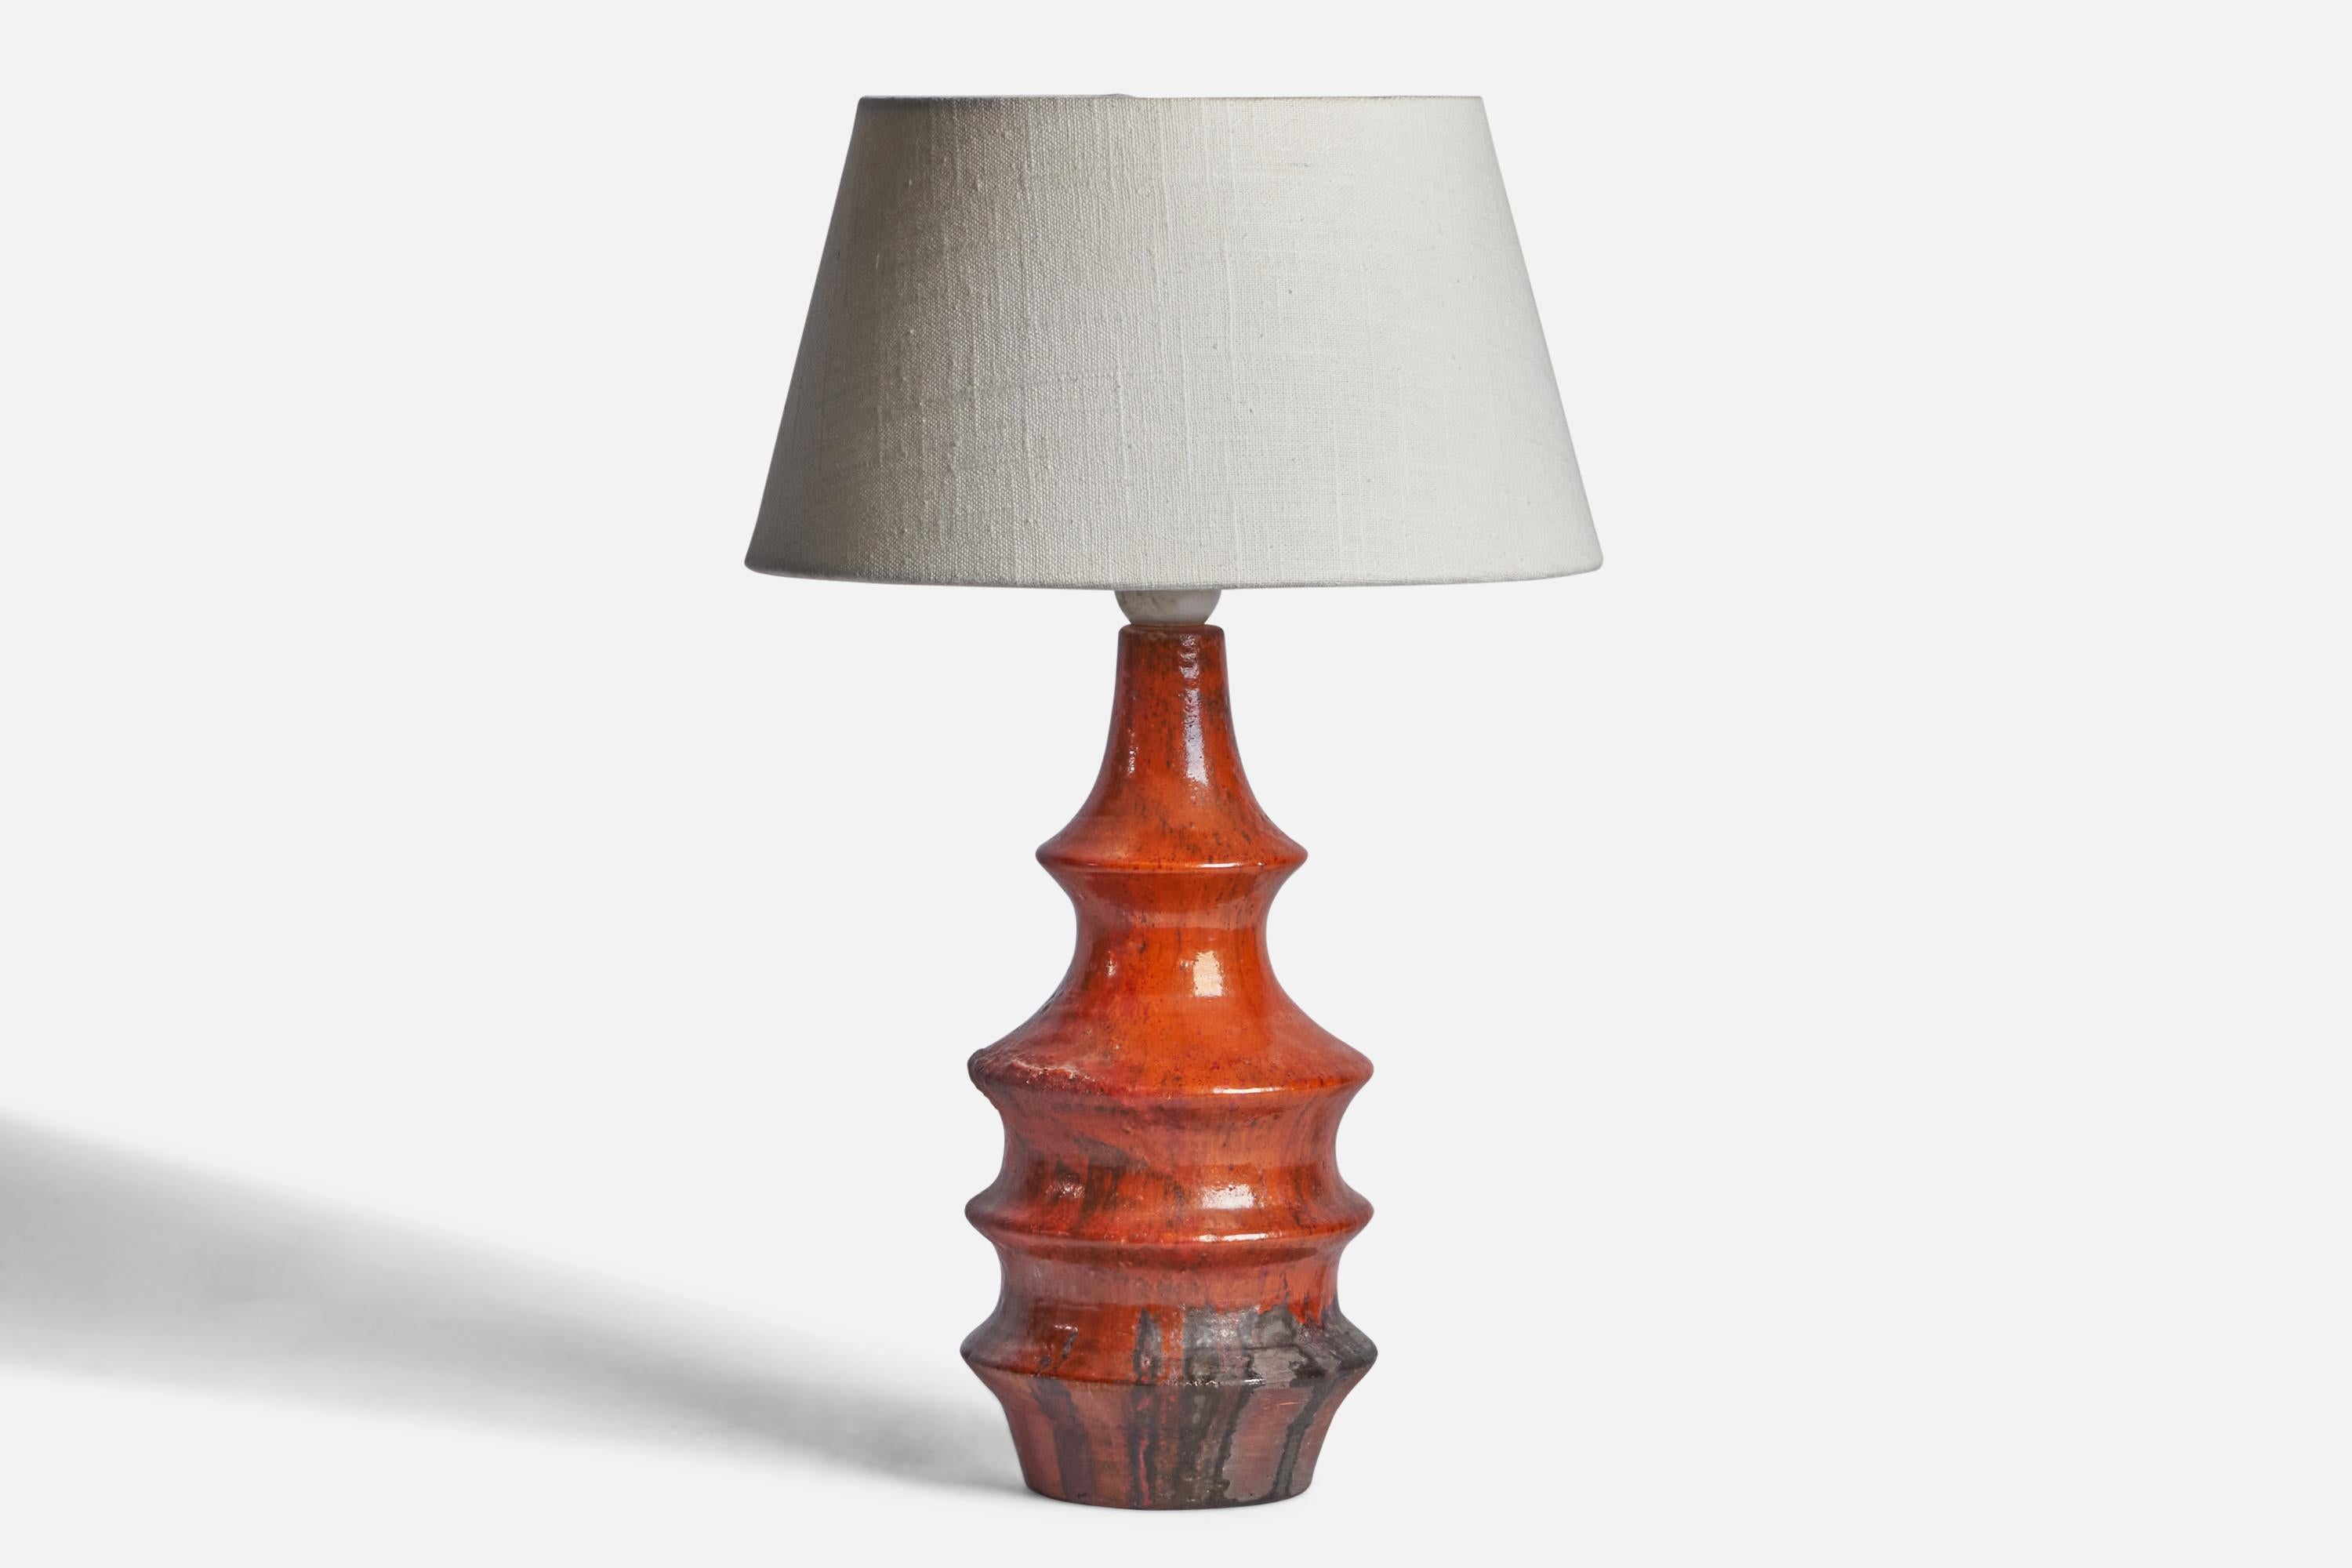 A red and black-glazed stoneware table lamp designed by Architect Børge Wernonch and produced by Afta, Denmark, c. 1940s.

Dimensions of Lamp (inches): 13.25” H x 4.75” Diameter
Dimensions of Shade (inches): 7” Top Diameter x 10” Bottom Diameter x